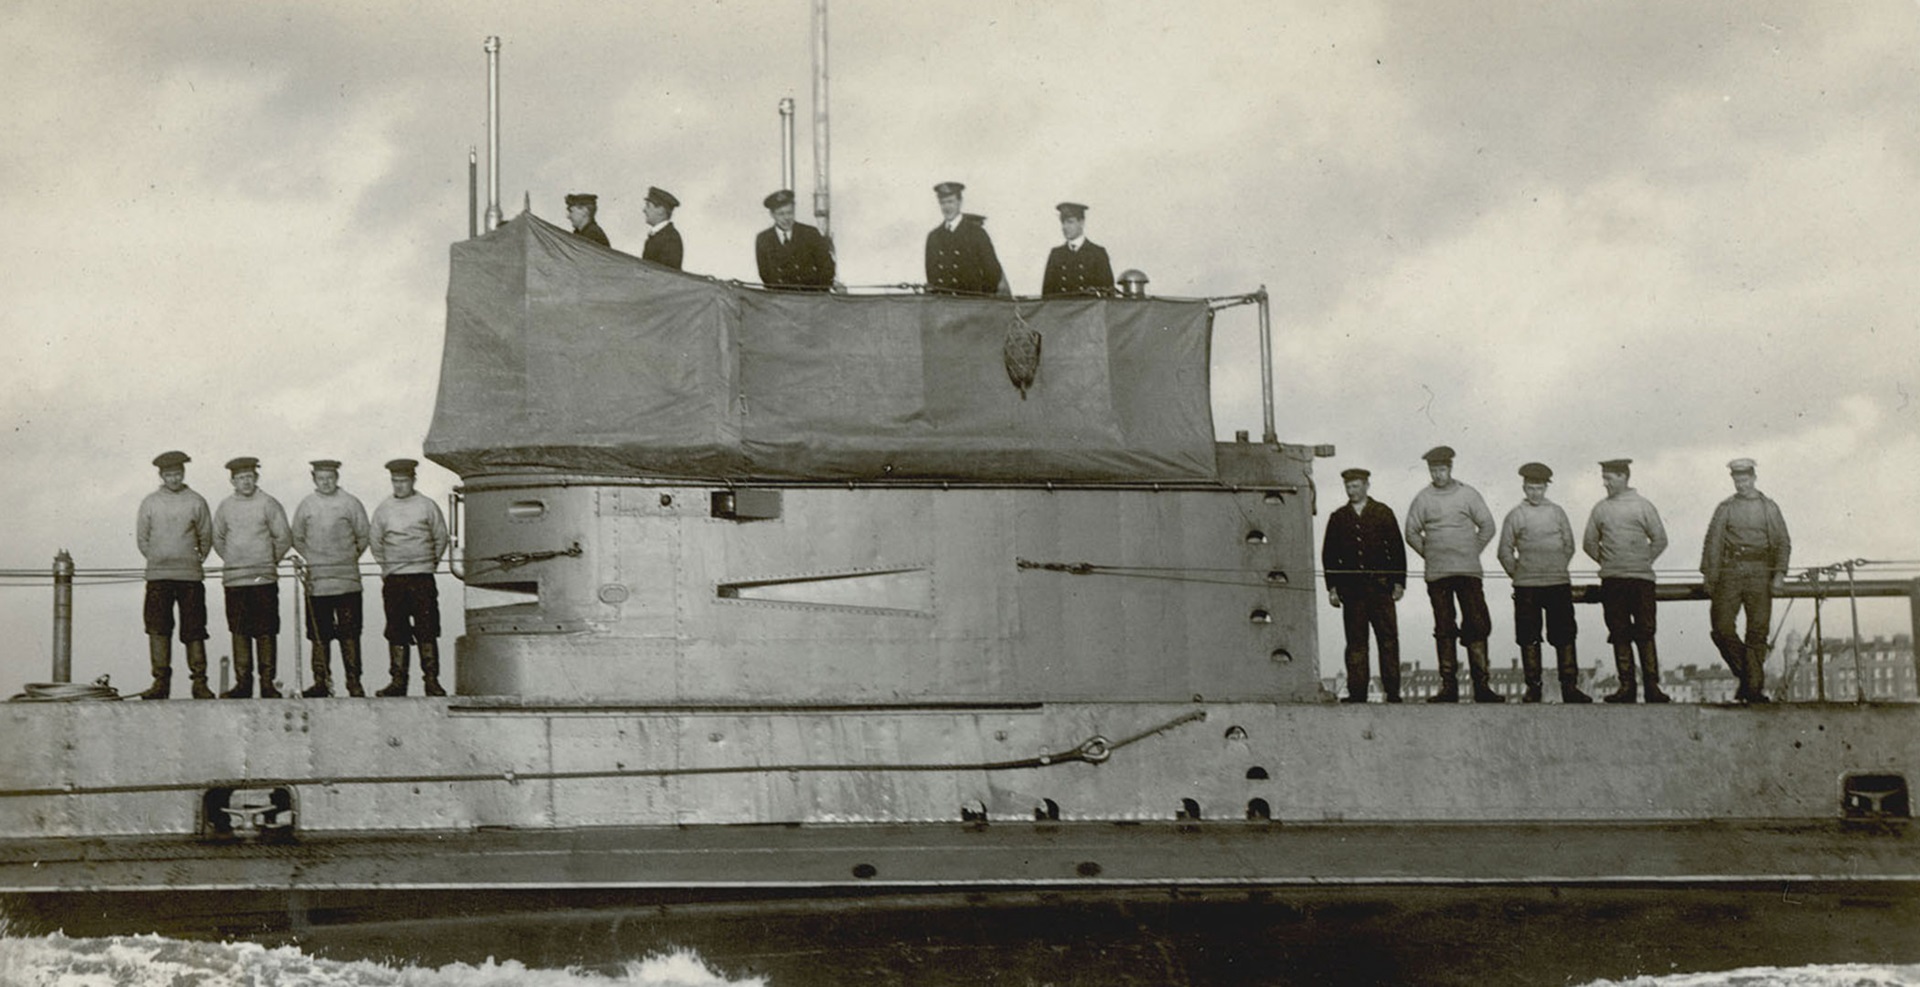 Black and white image of numerous sailors and officers posing on board the submarine HMAS AE2